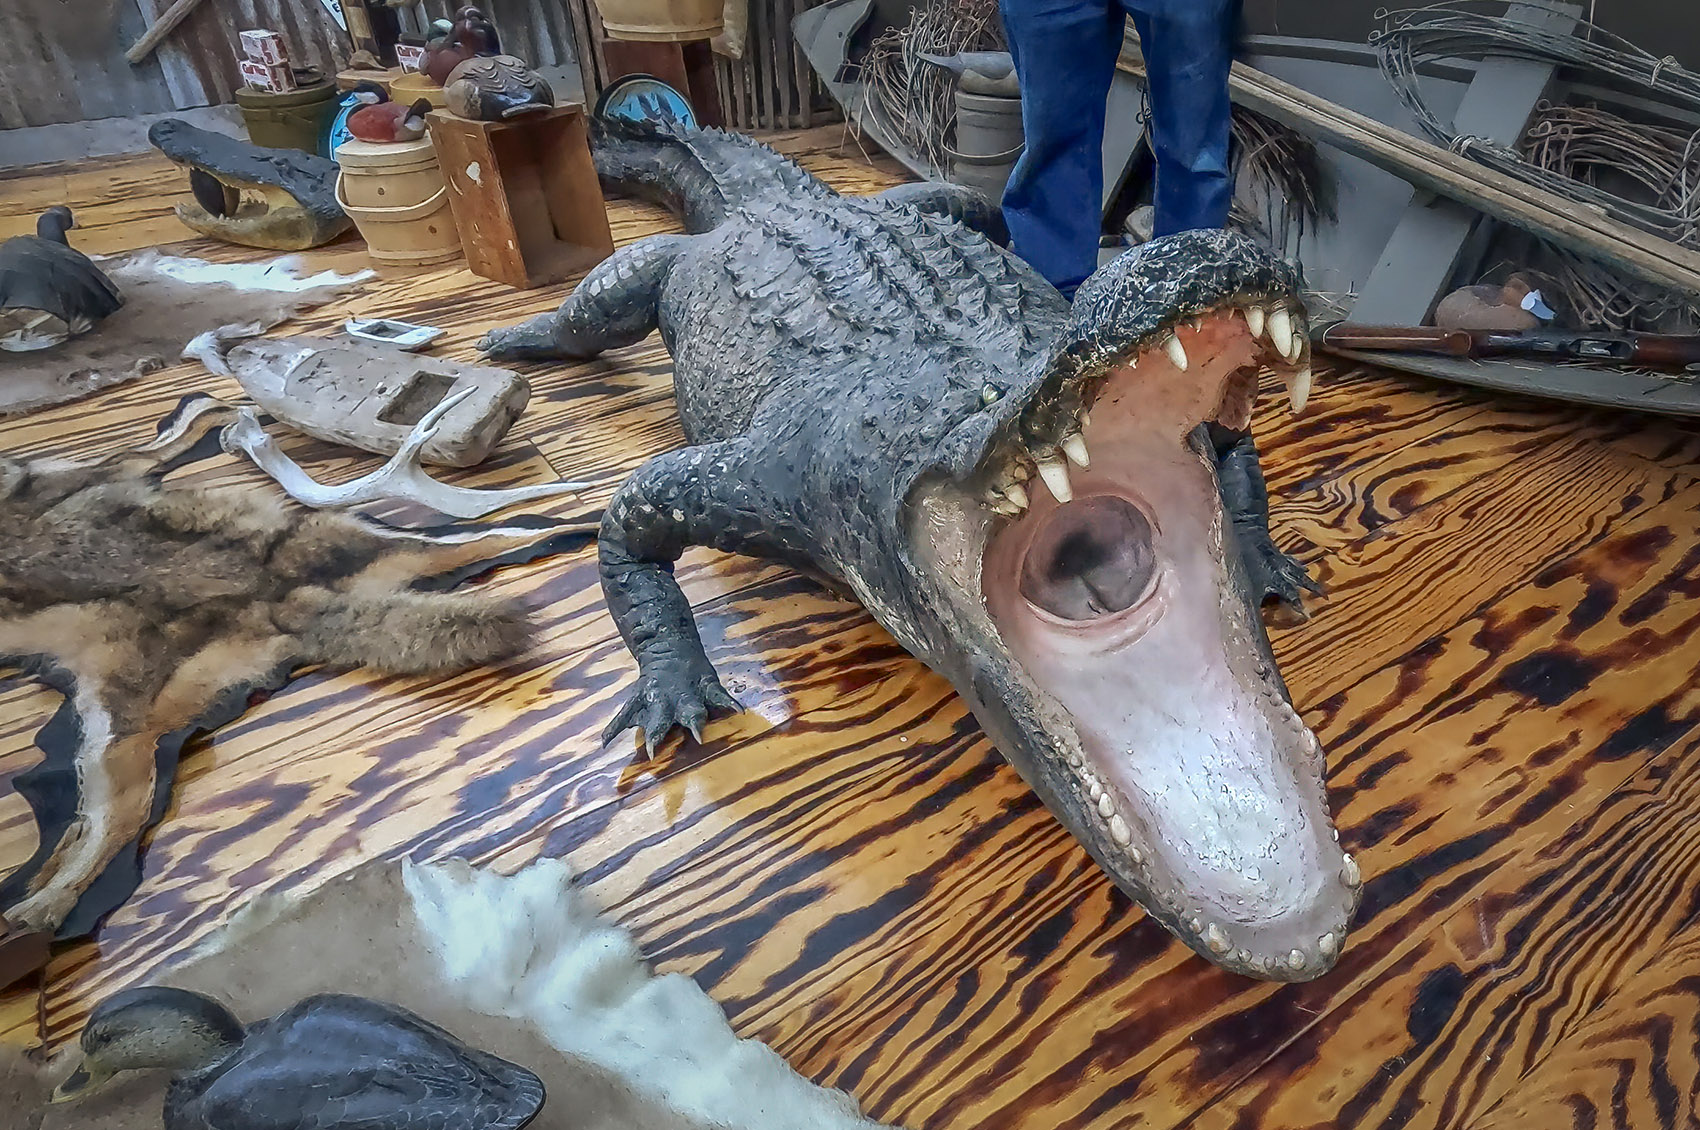 giant preserved alligator surrounded by Cajun collection of hunting artifacts